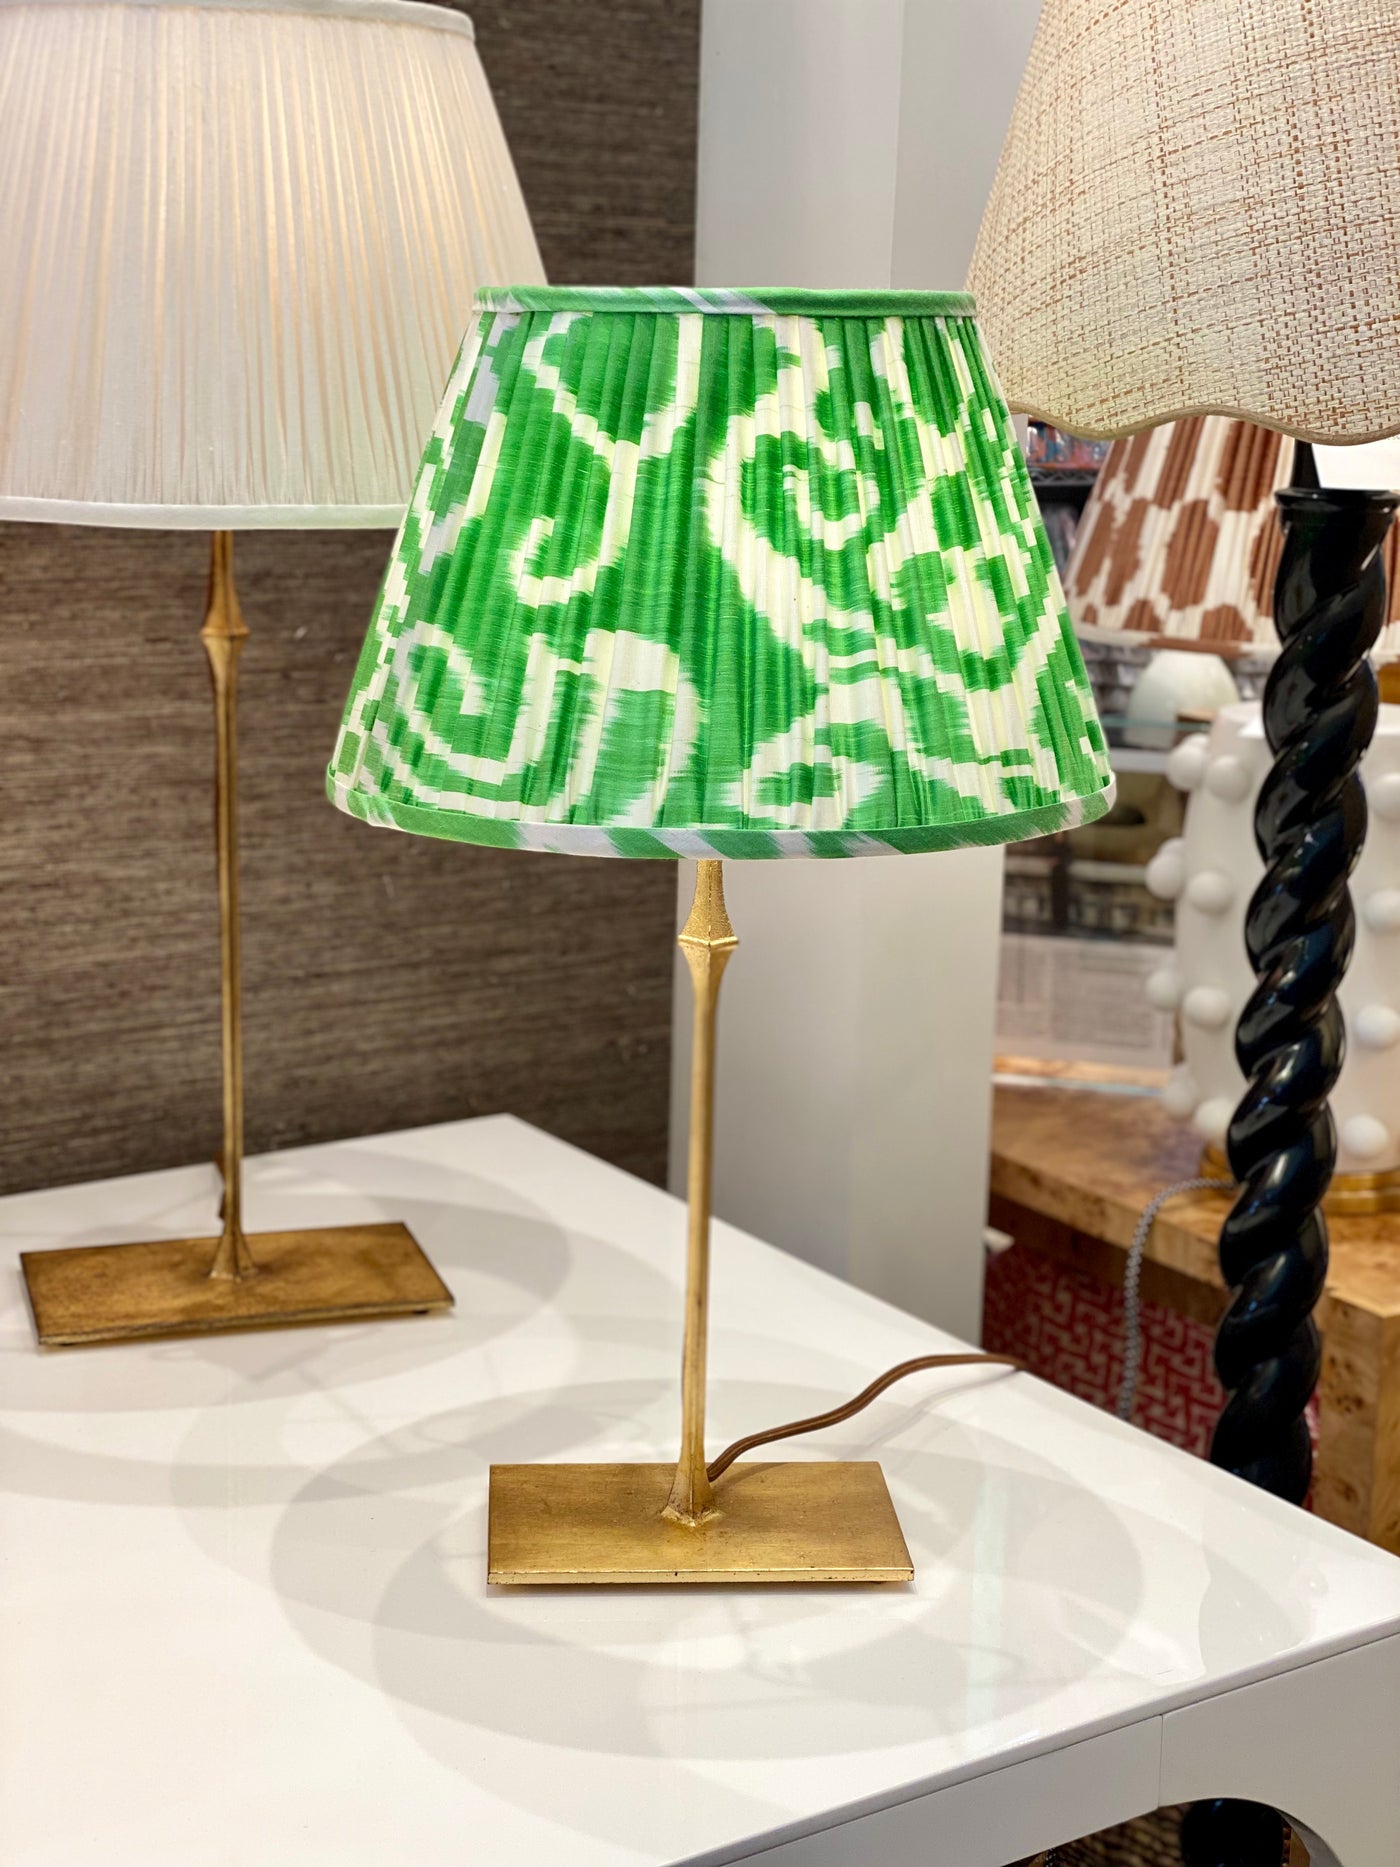 Green and white ikat lampshade on brass bedside lamp